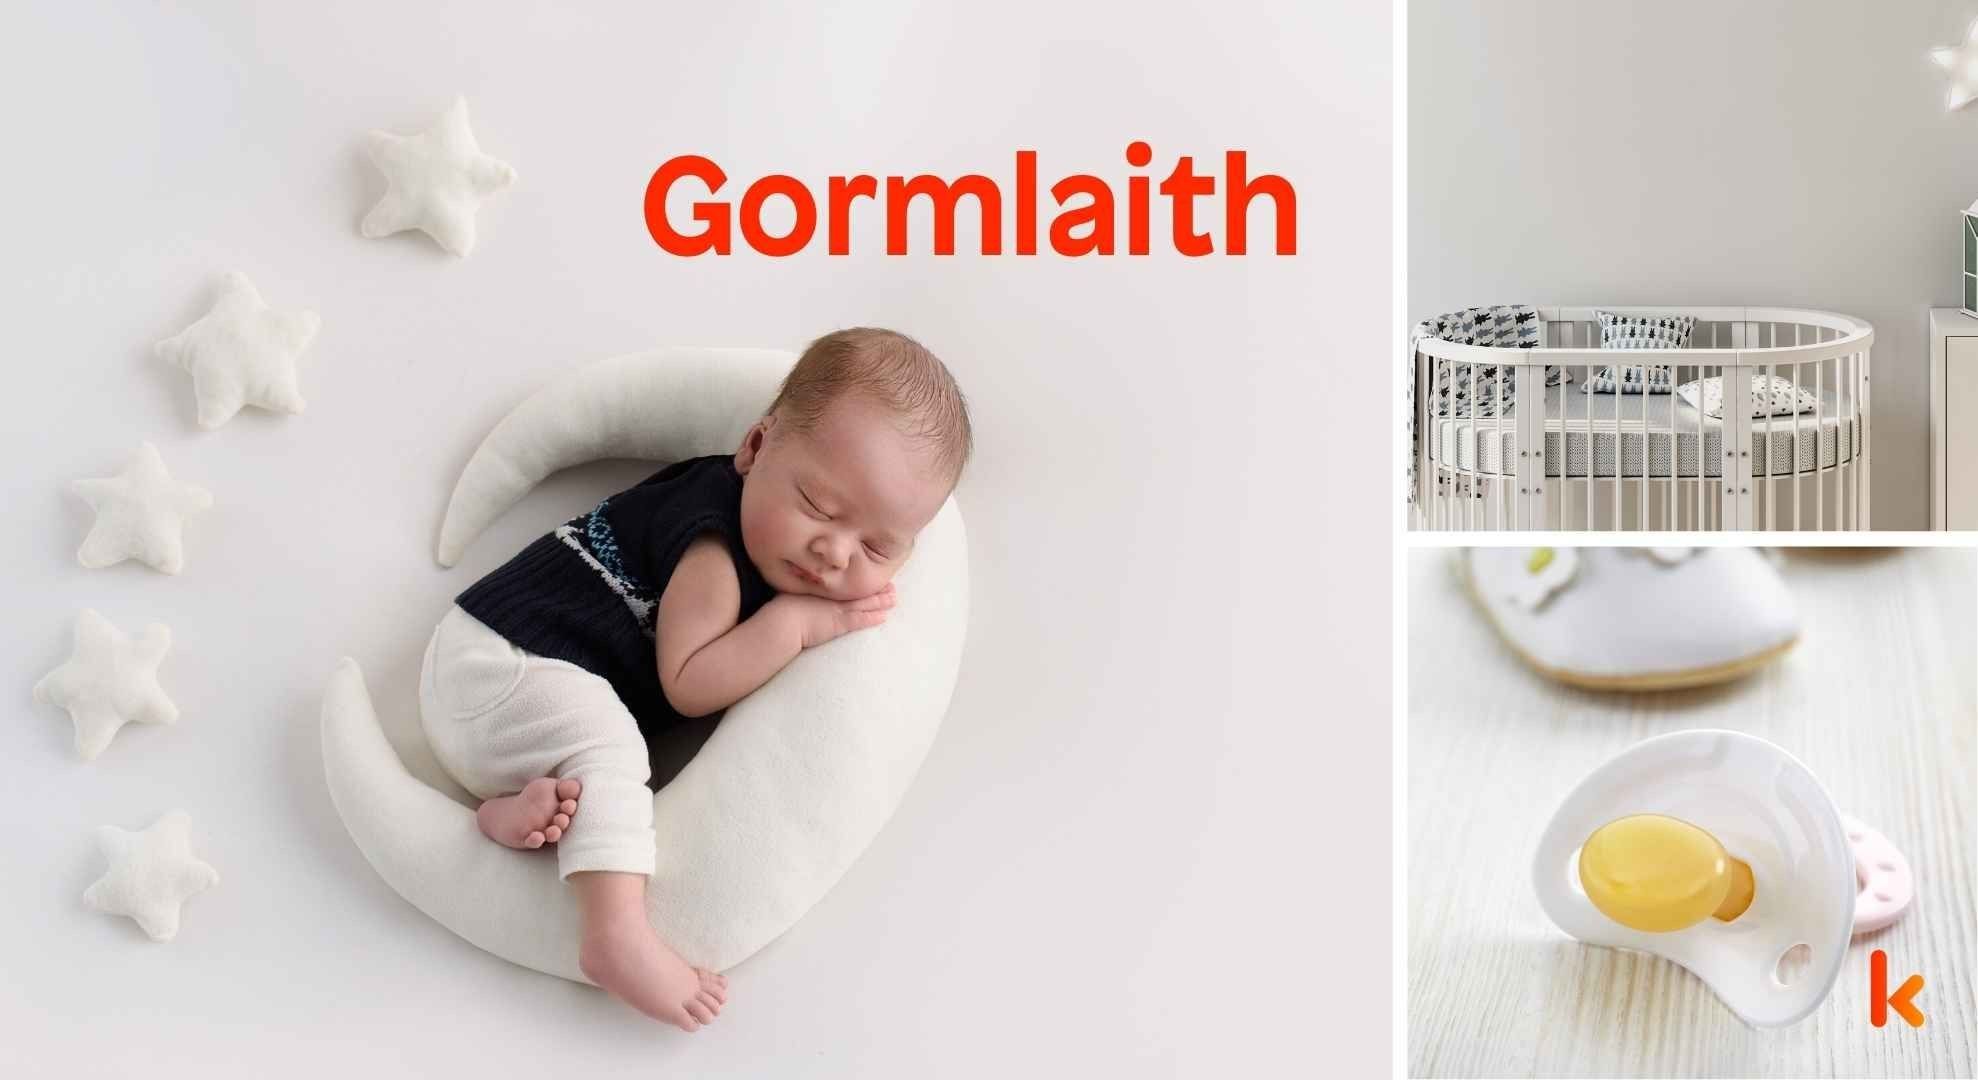 Meaning of the name Gormlaith